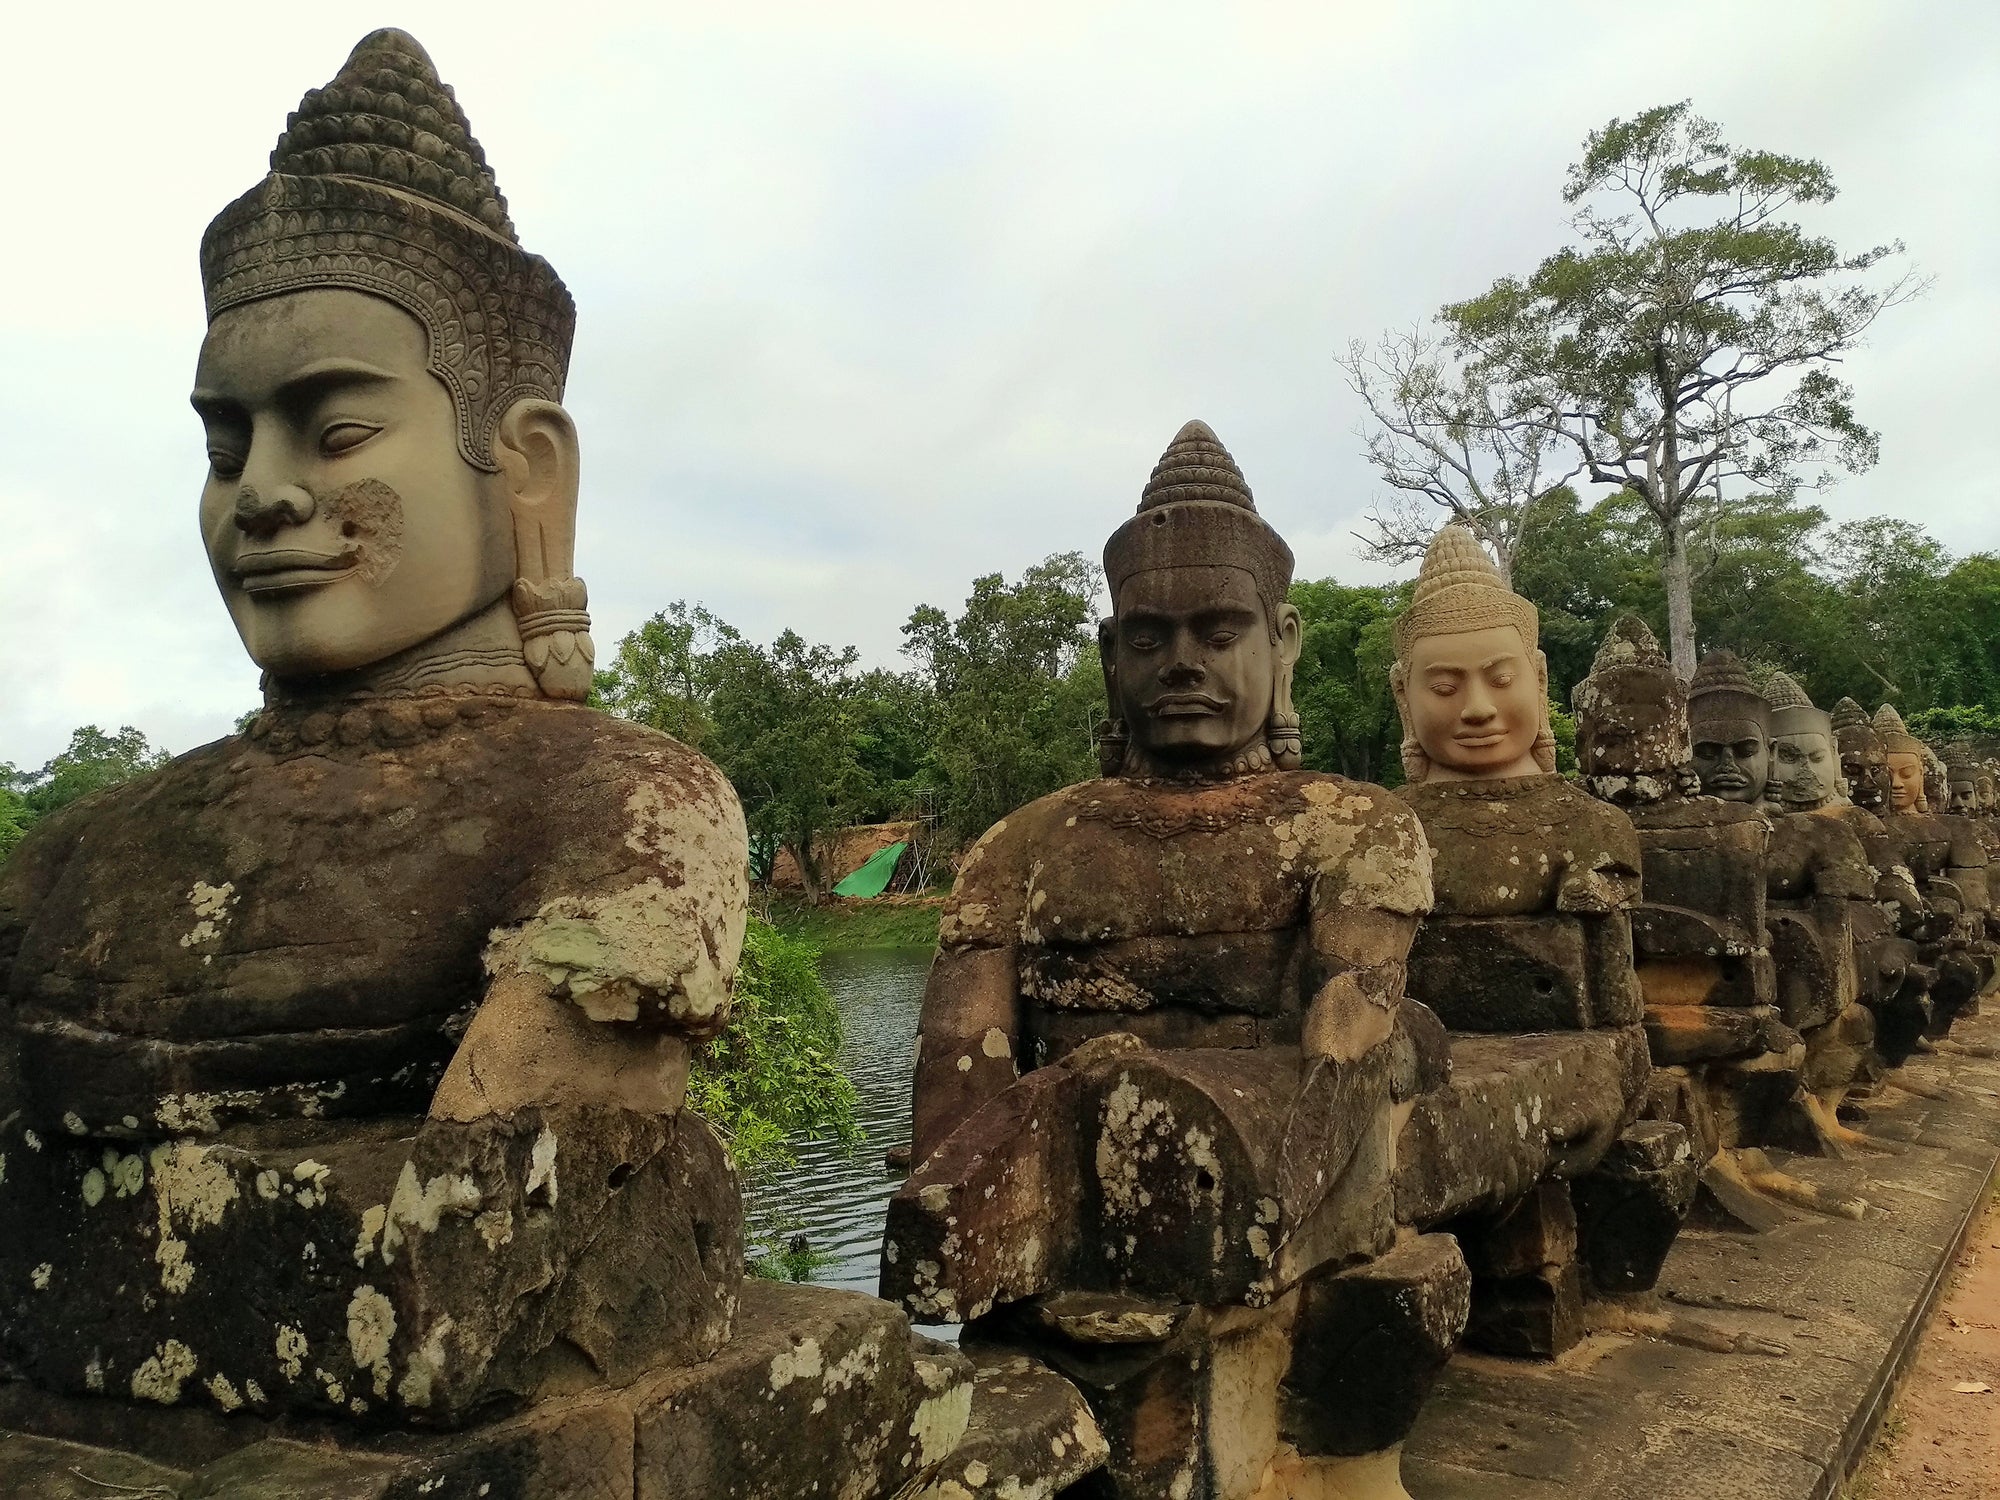 Angkor Thom - Churning of the Ocean Hindu mythology scene featuring rows of Gods and Demons on the causeway leading to Bayon